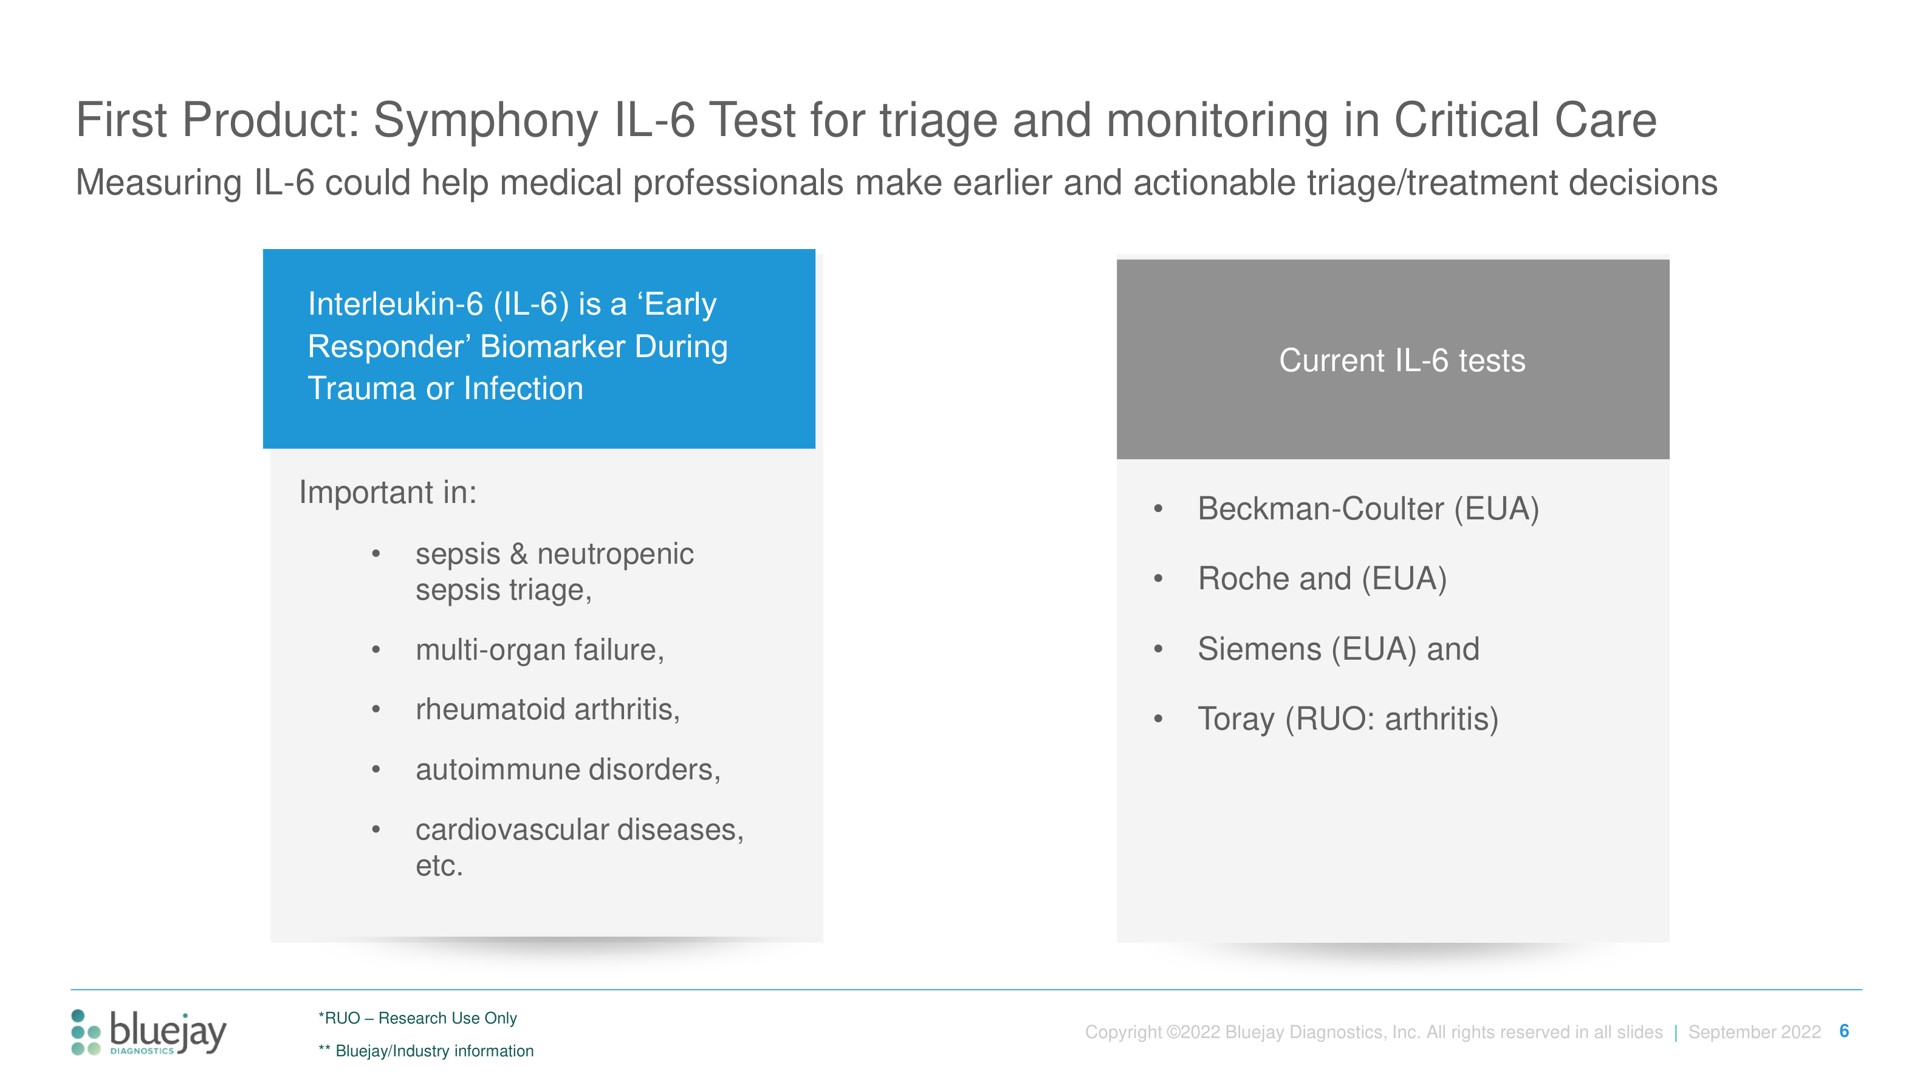 first product symphony test for triage and monitoring in critical care measuring could help medical professionals make actionable treatment decisions | Bluejay